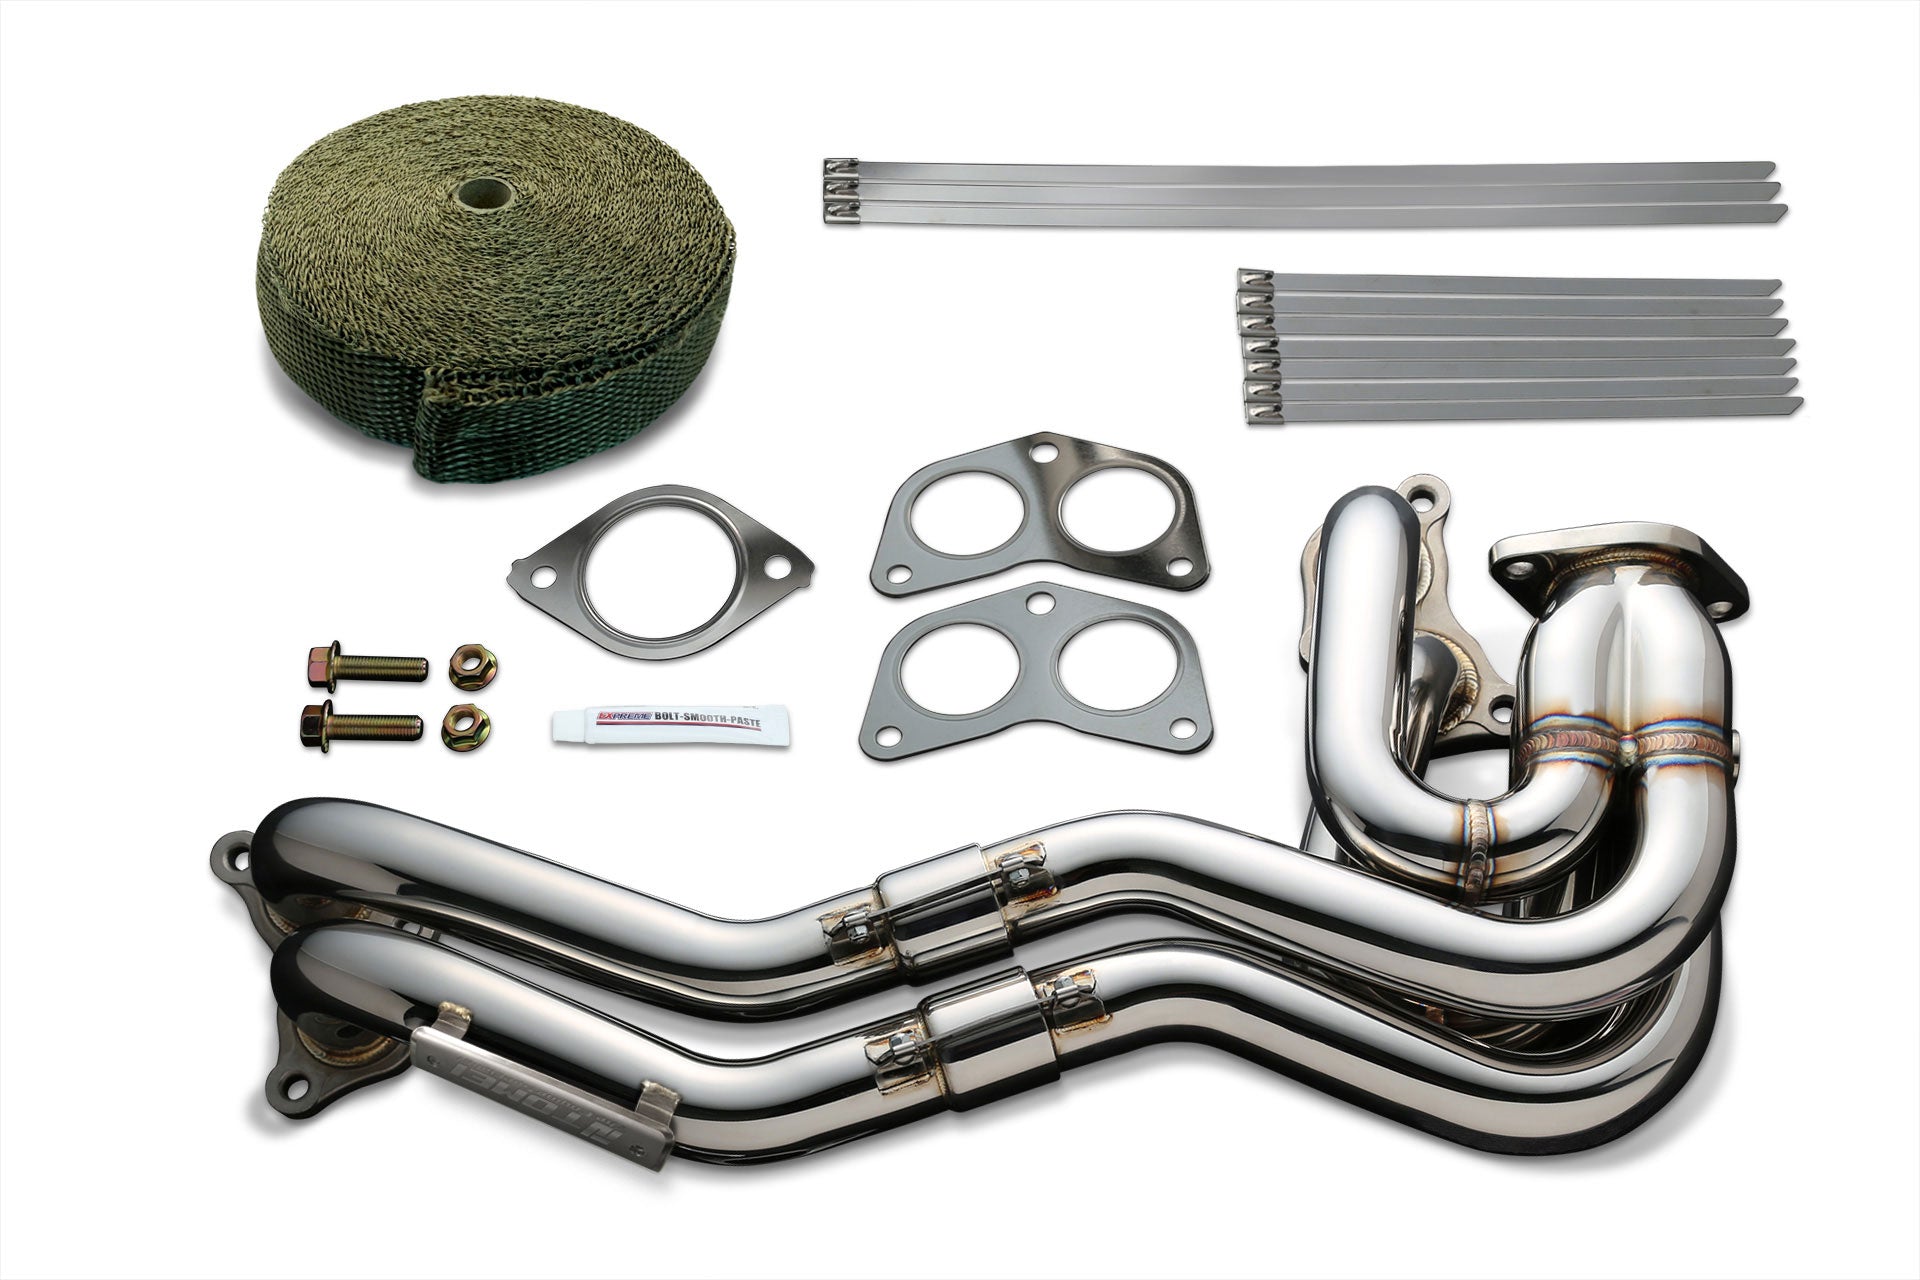 TOMEI EXHAUST MANIFOLD KIT EXPREME FA20 ZN6/ZC6 UNEQUAL LENGTH with TITAN EXHAUS